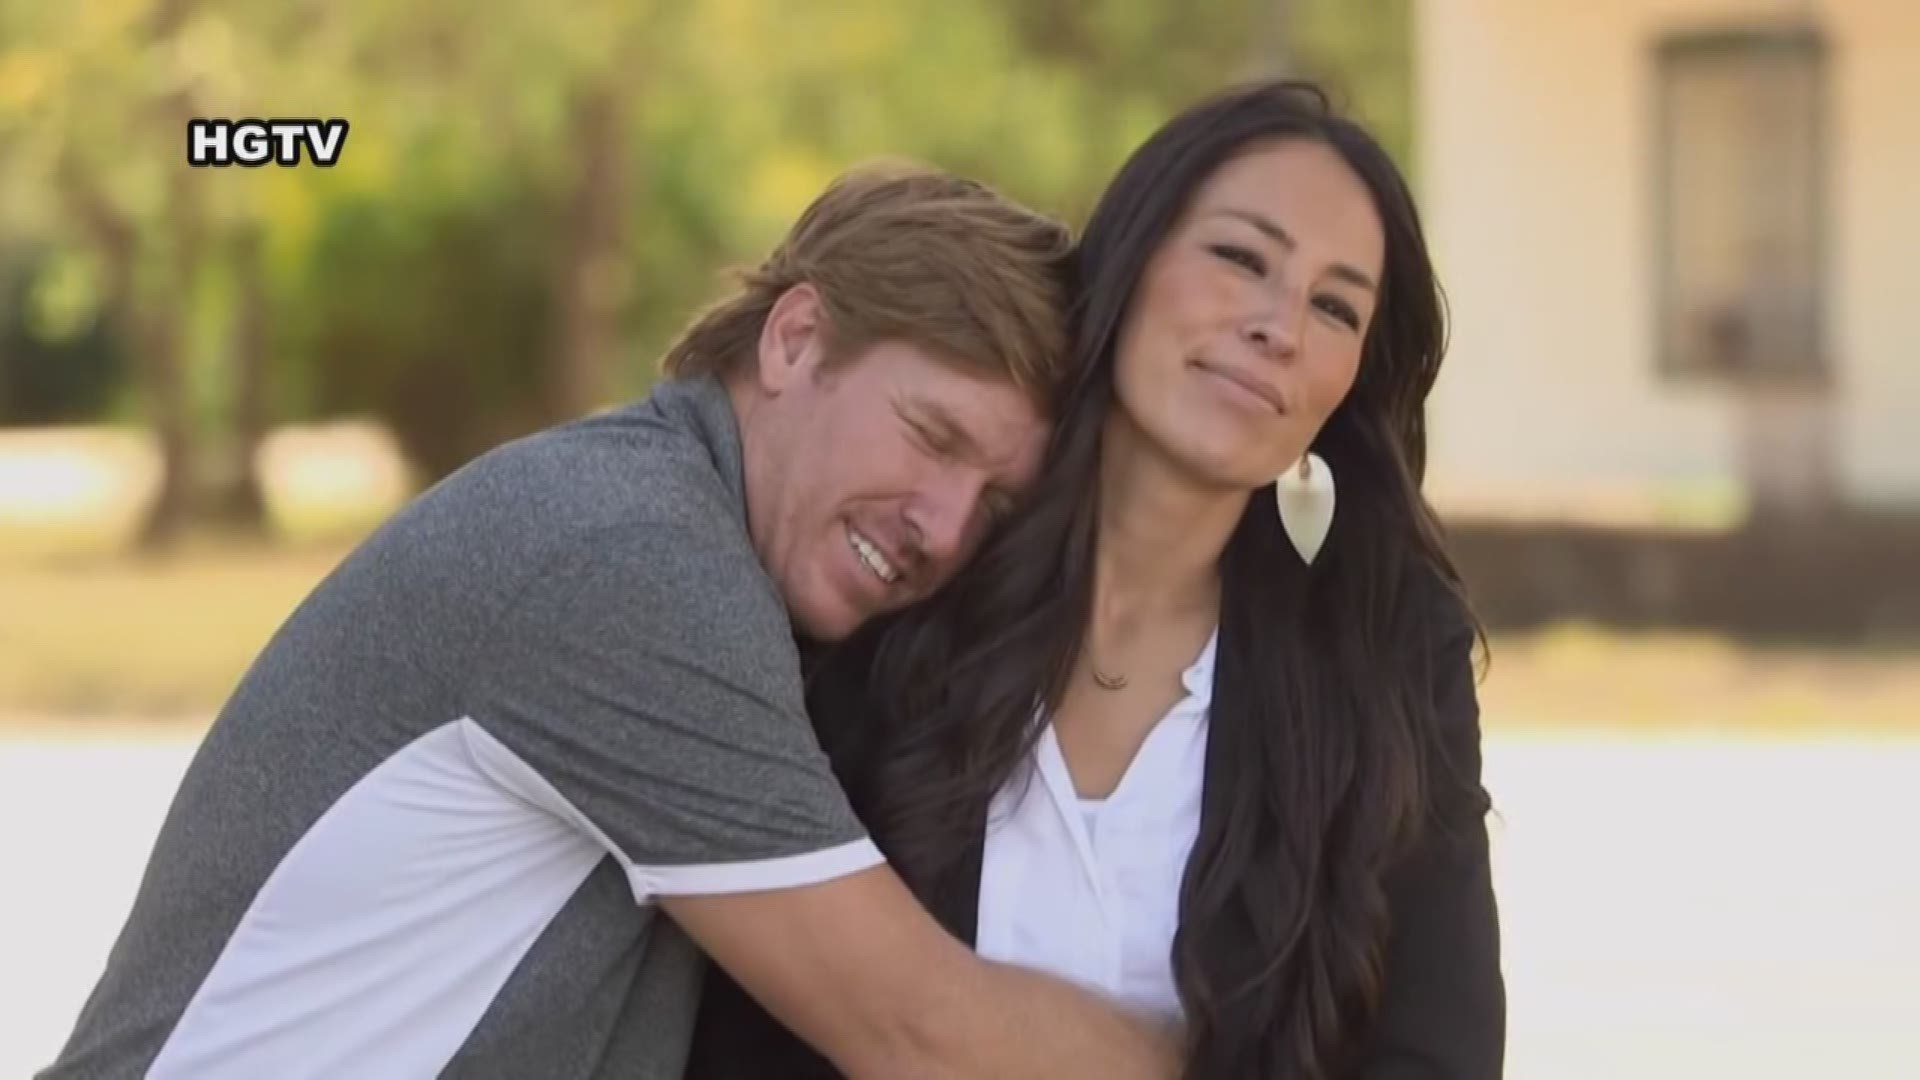 Target is partnering with 'Fixer Upper' stars Chip and Joanna Gaines for a new, "modern farmhouse" home collection.